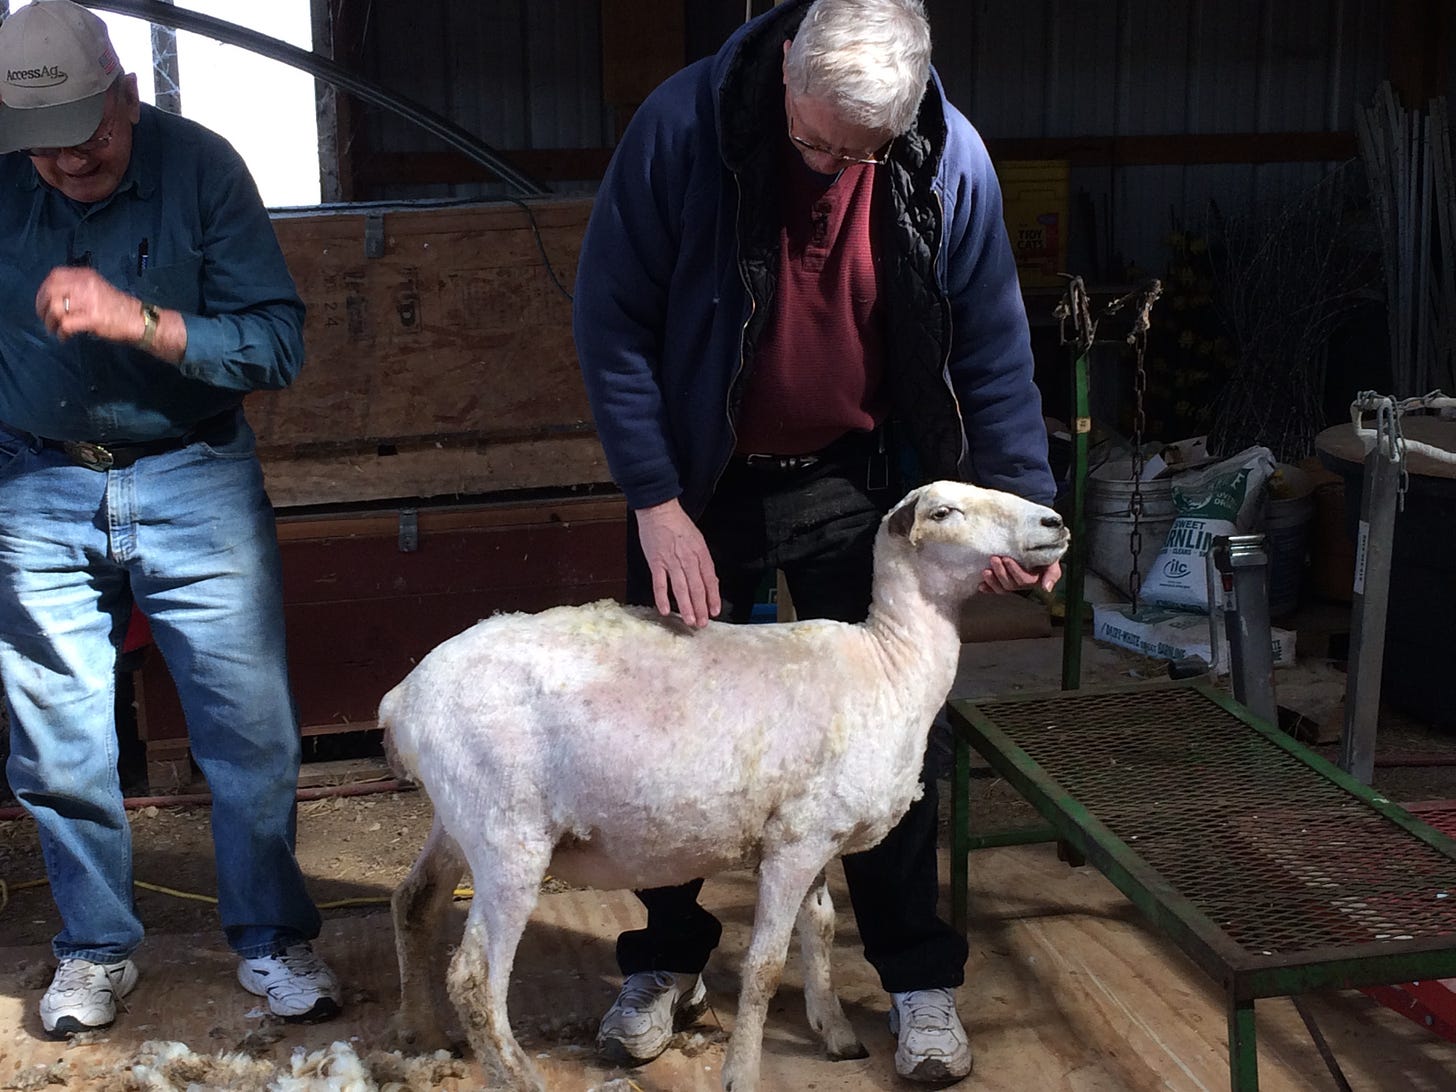 Two older men standing by a freshly-shorn sheep